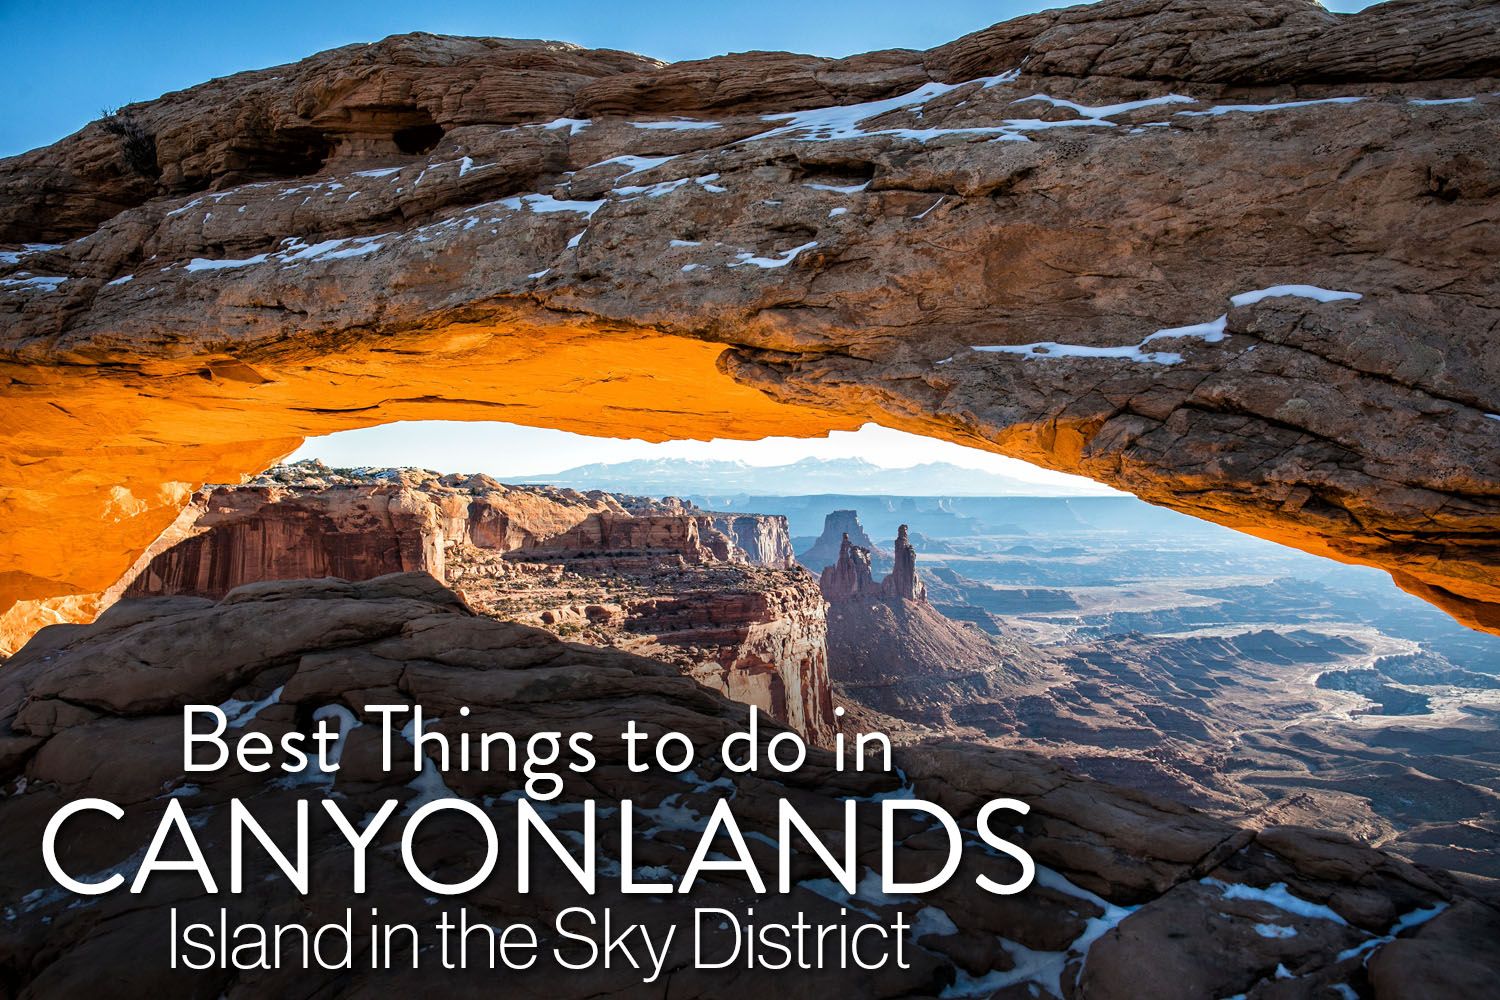 Canyonlands to do list